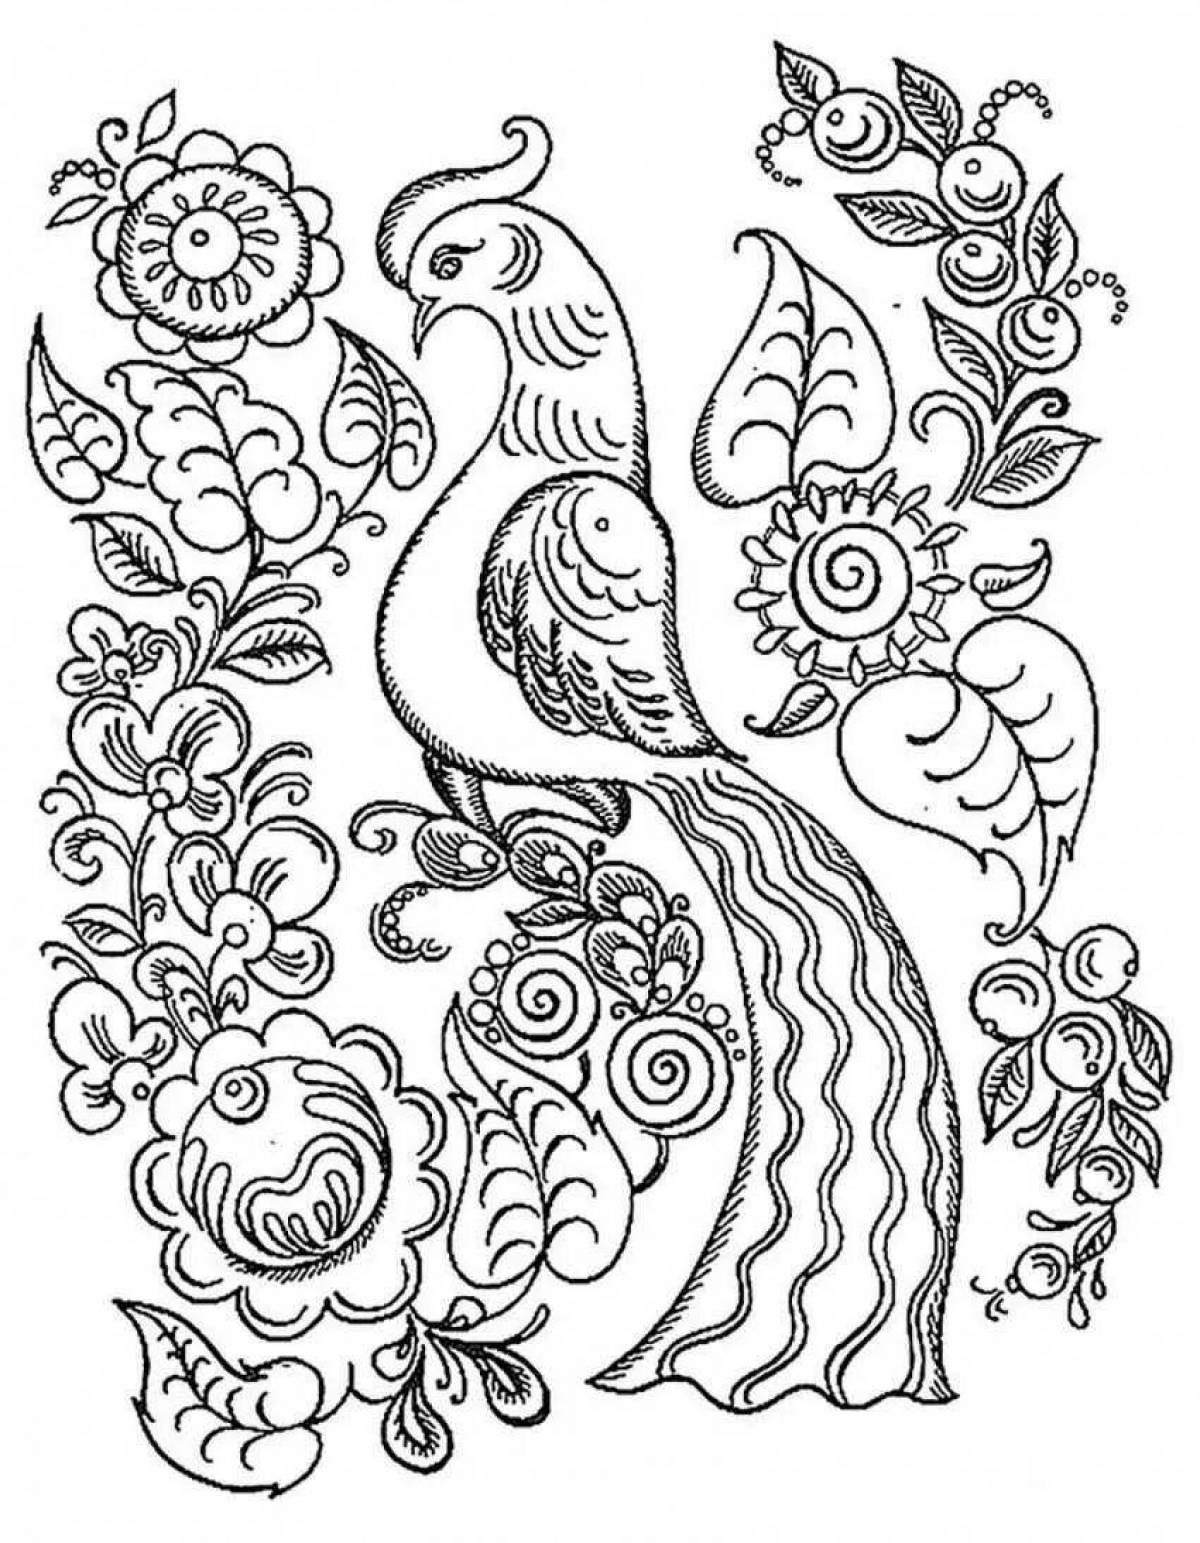 Intricate gorodets bird coloring book